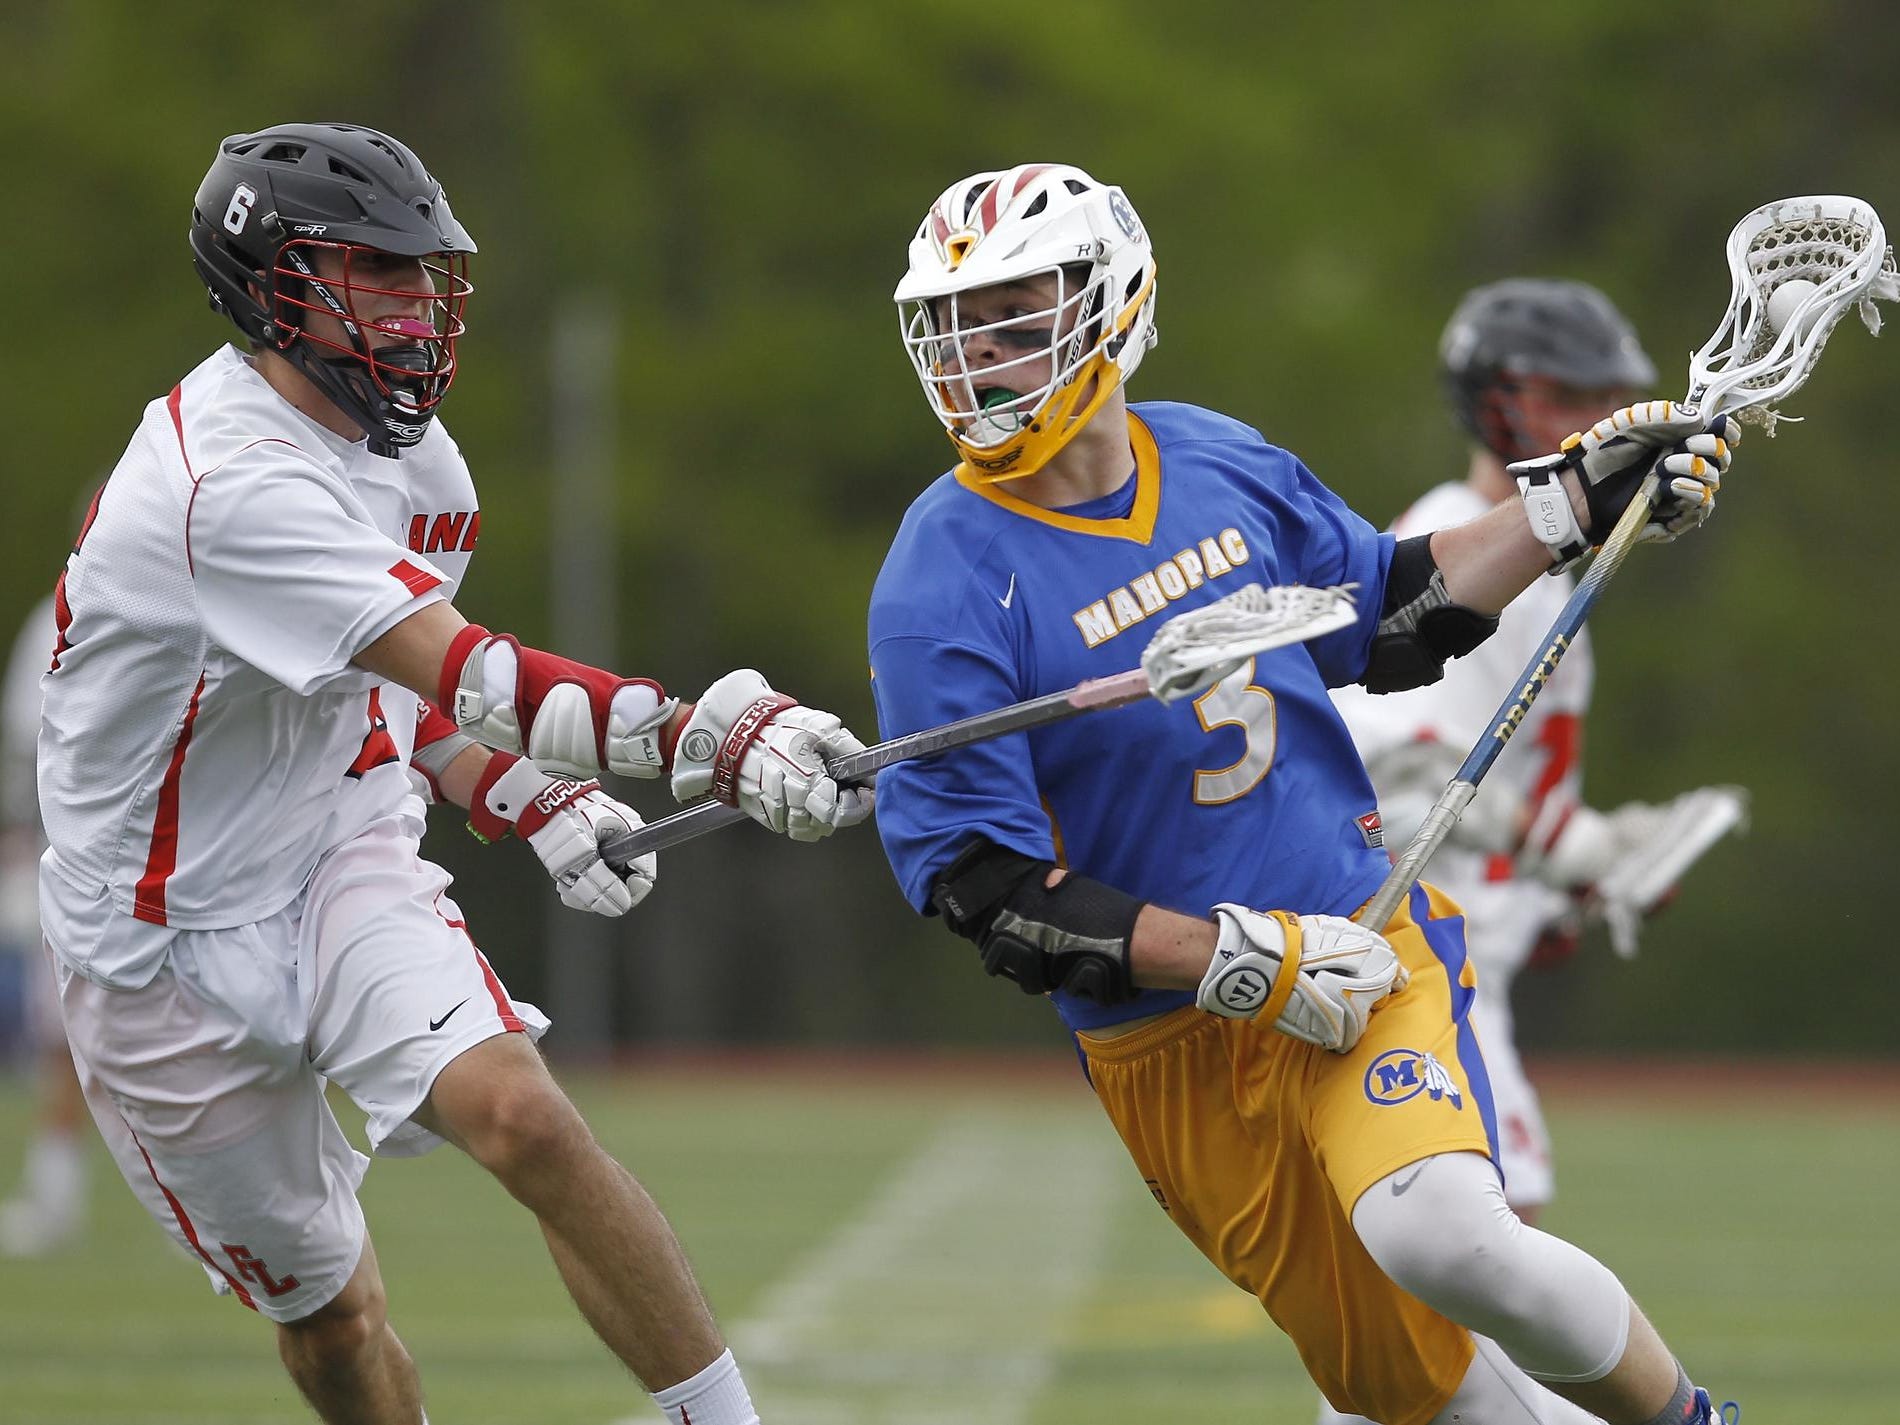 Mahopac’s Dan Foley works the ball against Fox Lane defenseman Sean New during a Class A quarterfinal at Fox Lane High School in Bedford on Wednesday. The Indians won 13-12.